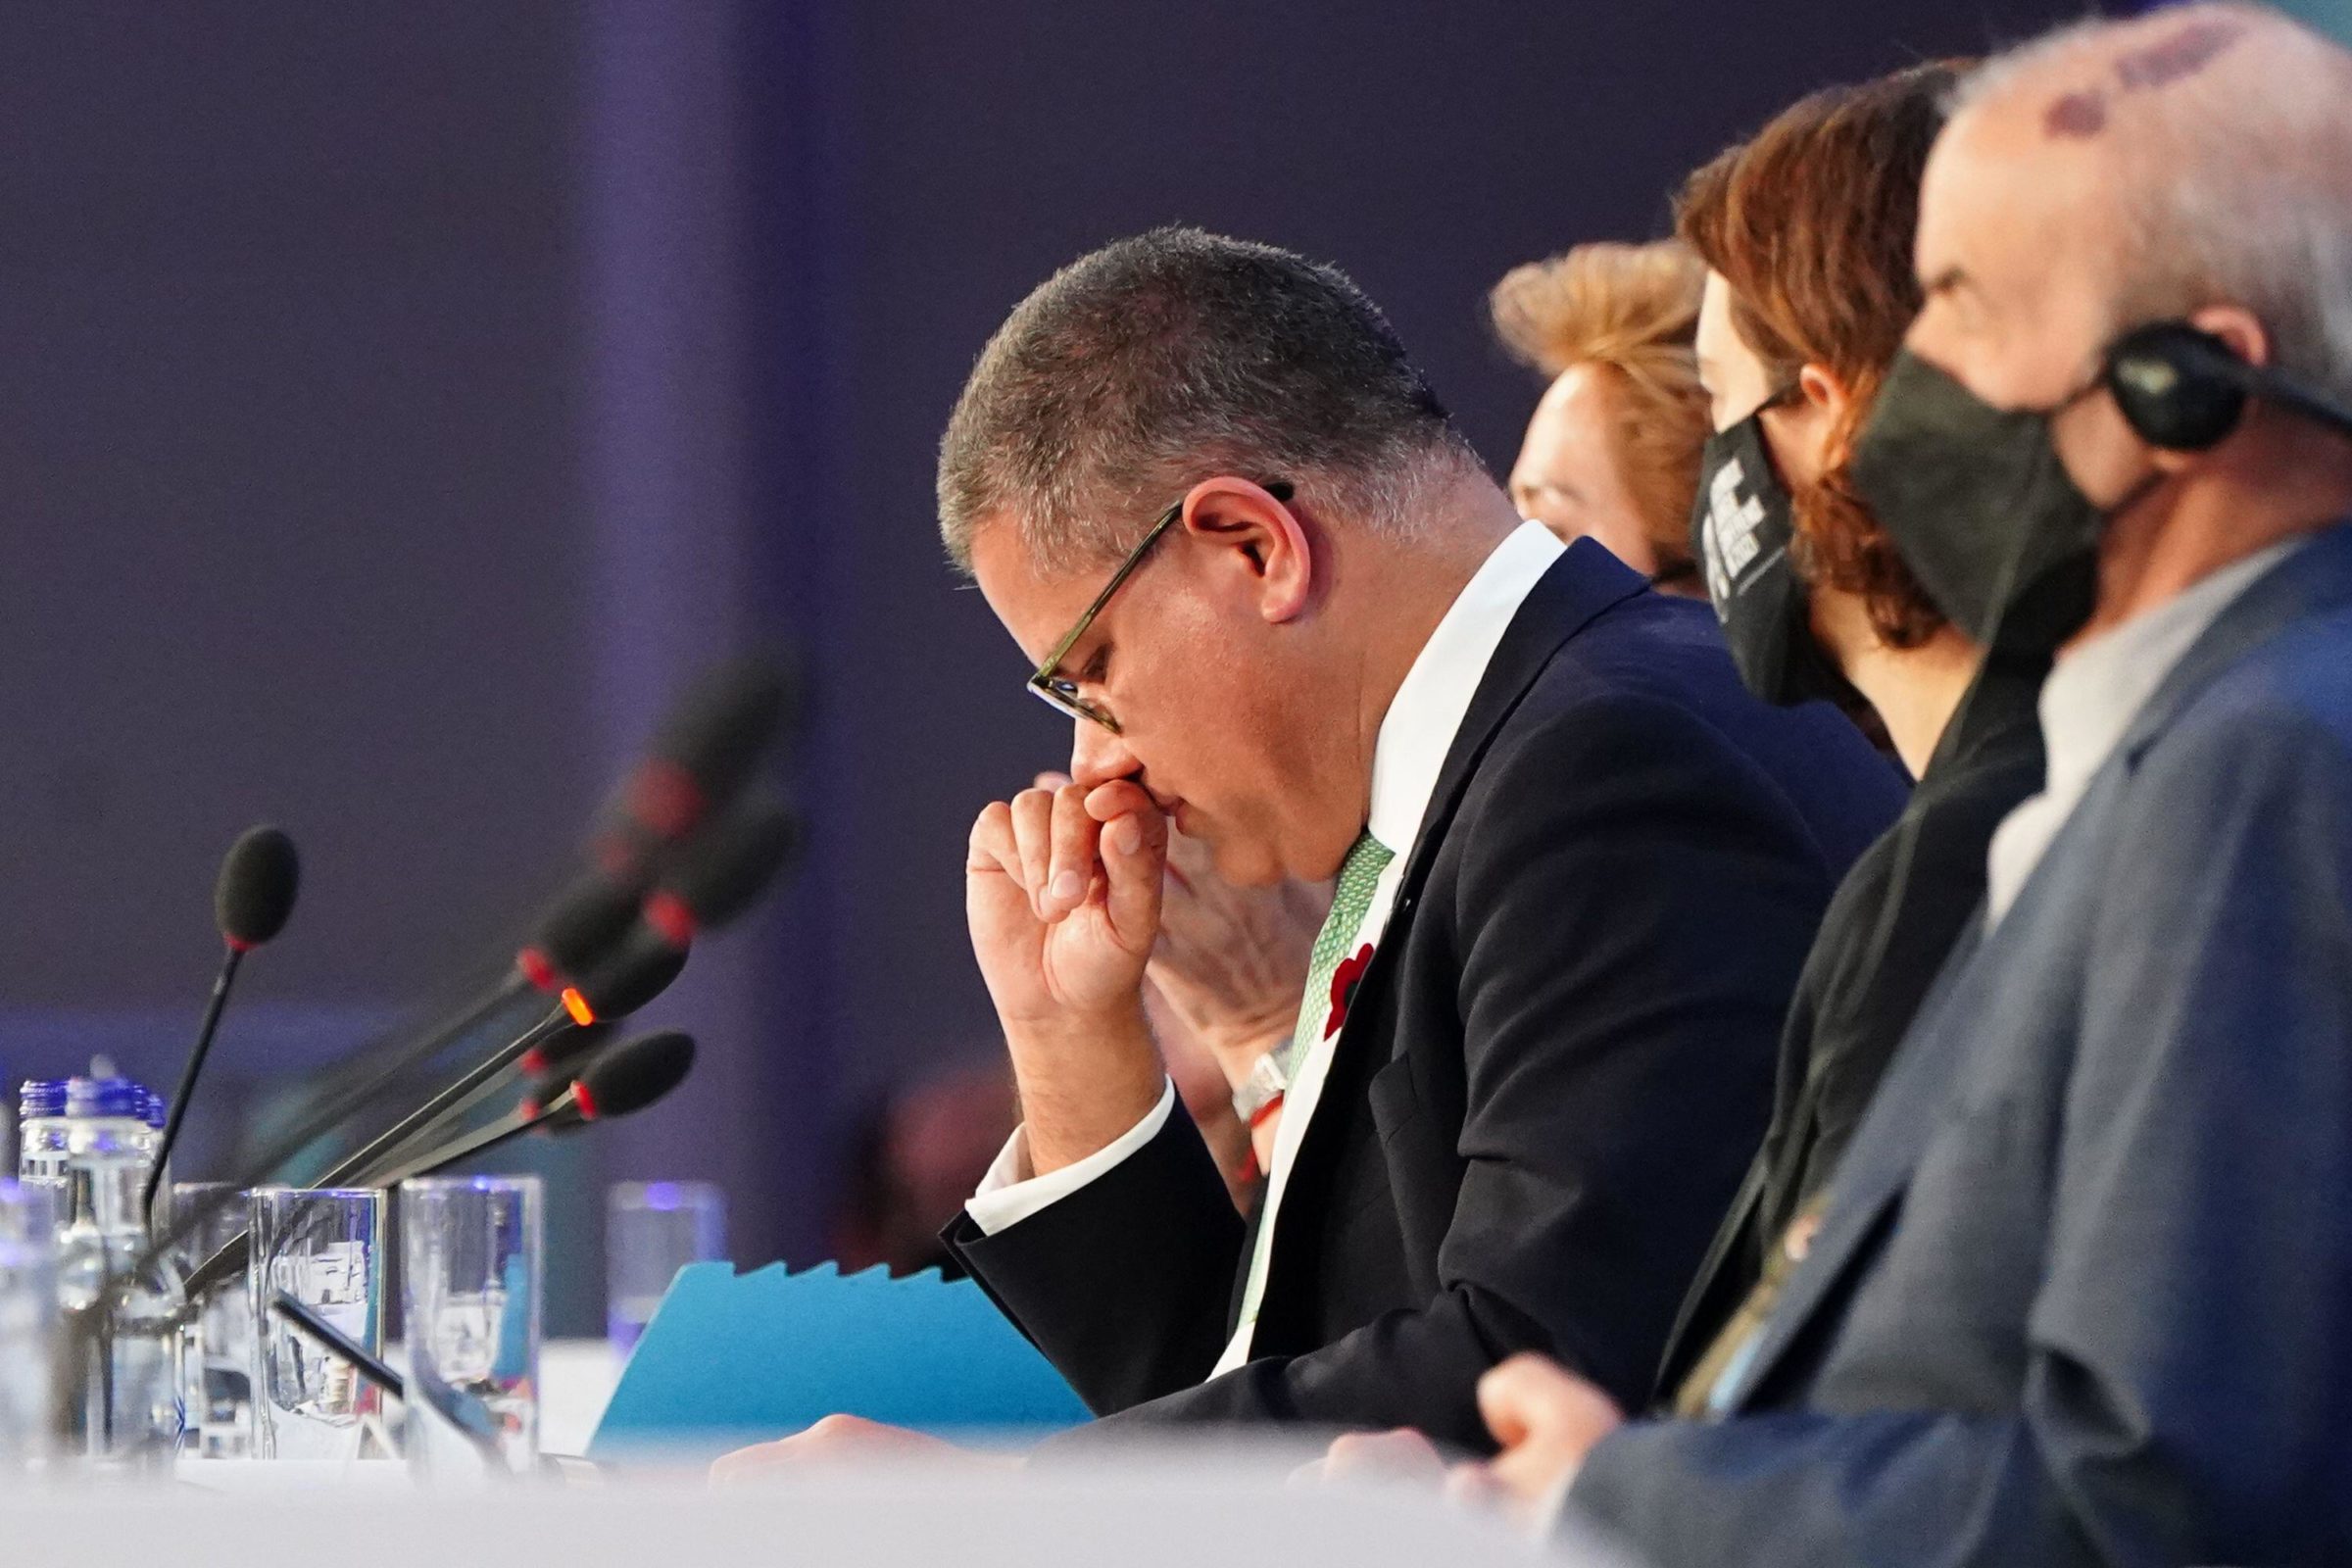 COP26 President Alok Sharma fights back tears as he apologises to delegates for the last-minute watering down of the Glasgow climate pact’s language on eliminating coal power (Image: Jane Barlow / Alamy)